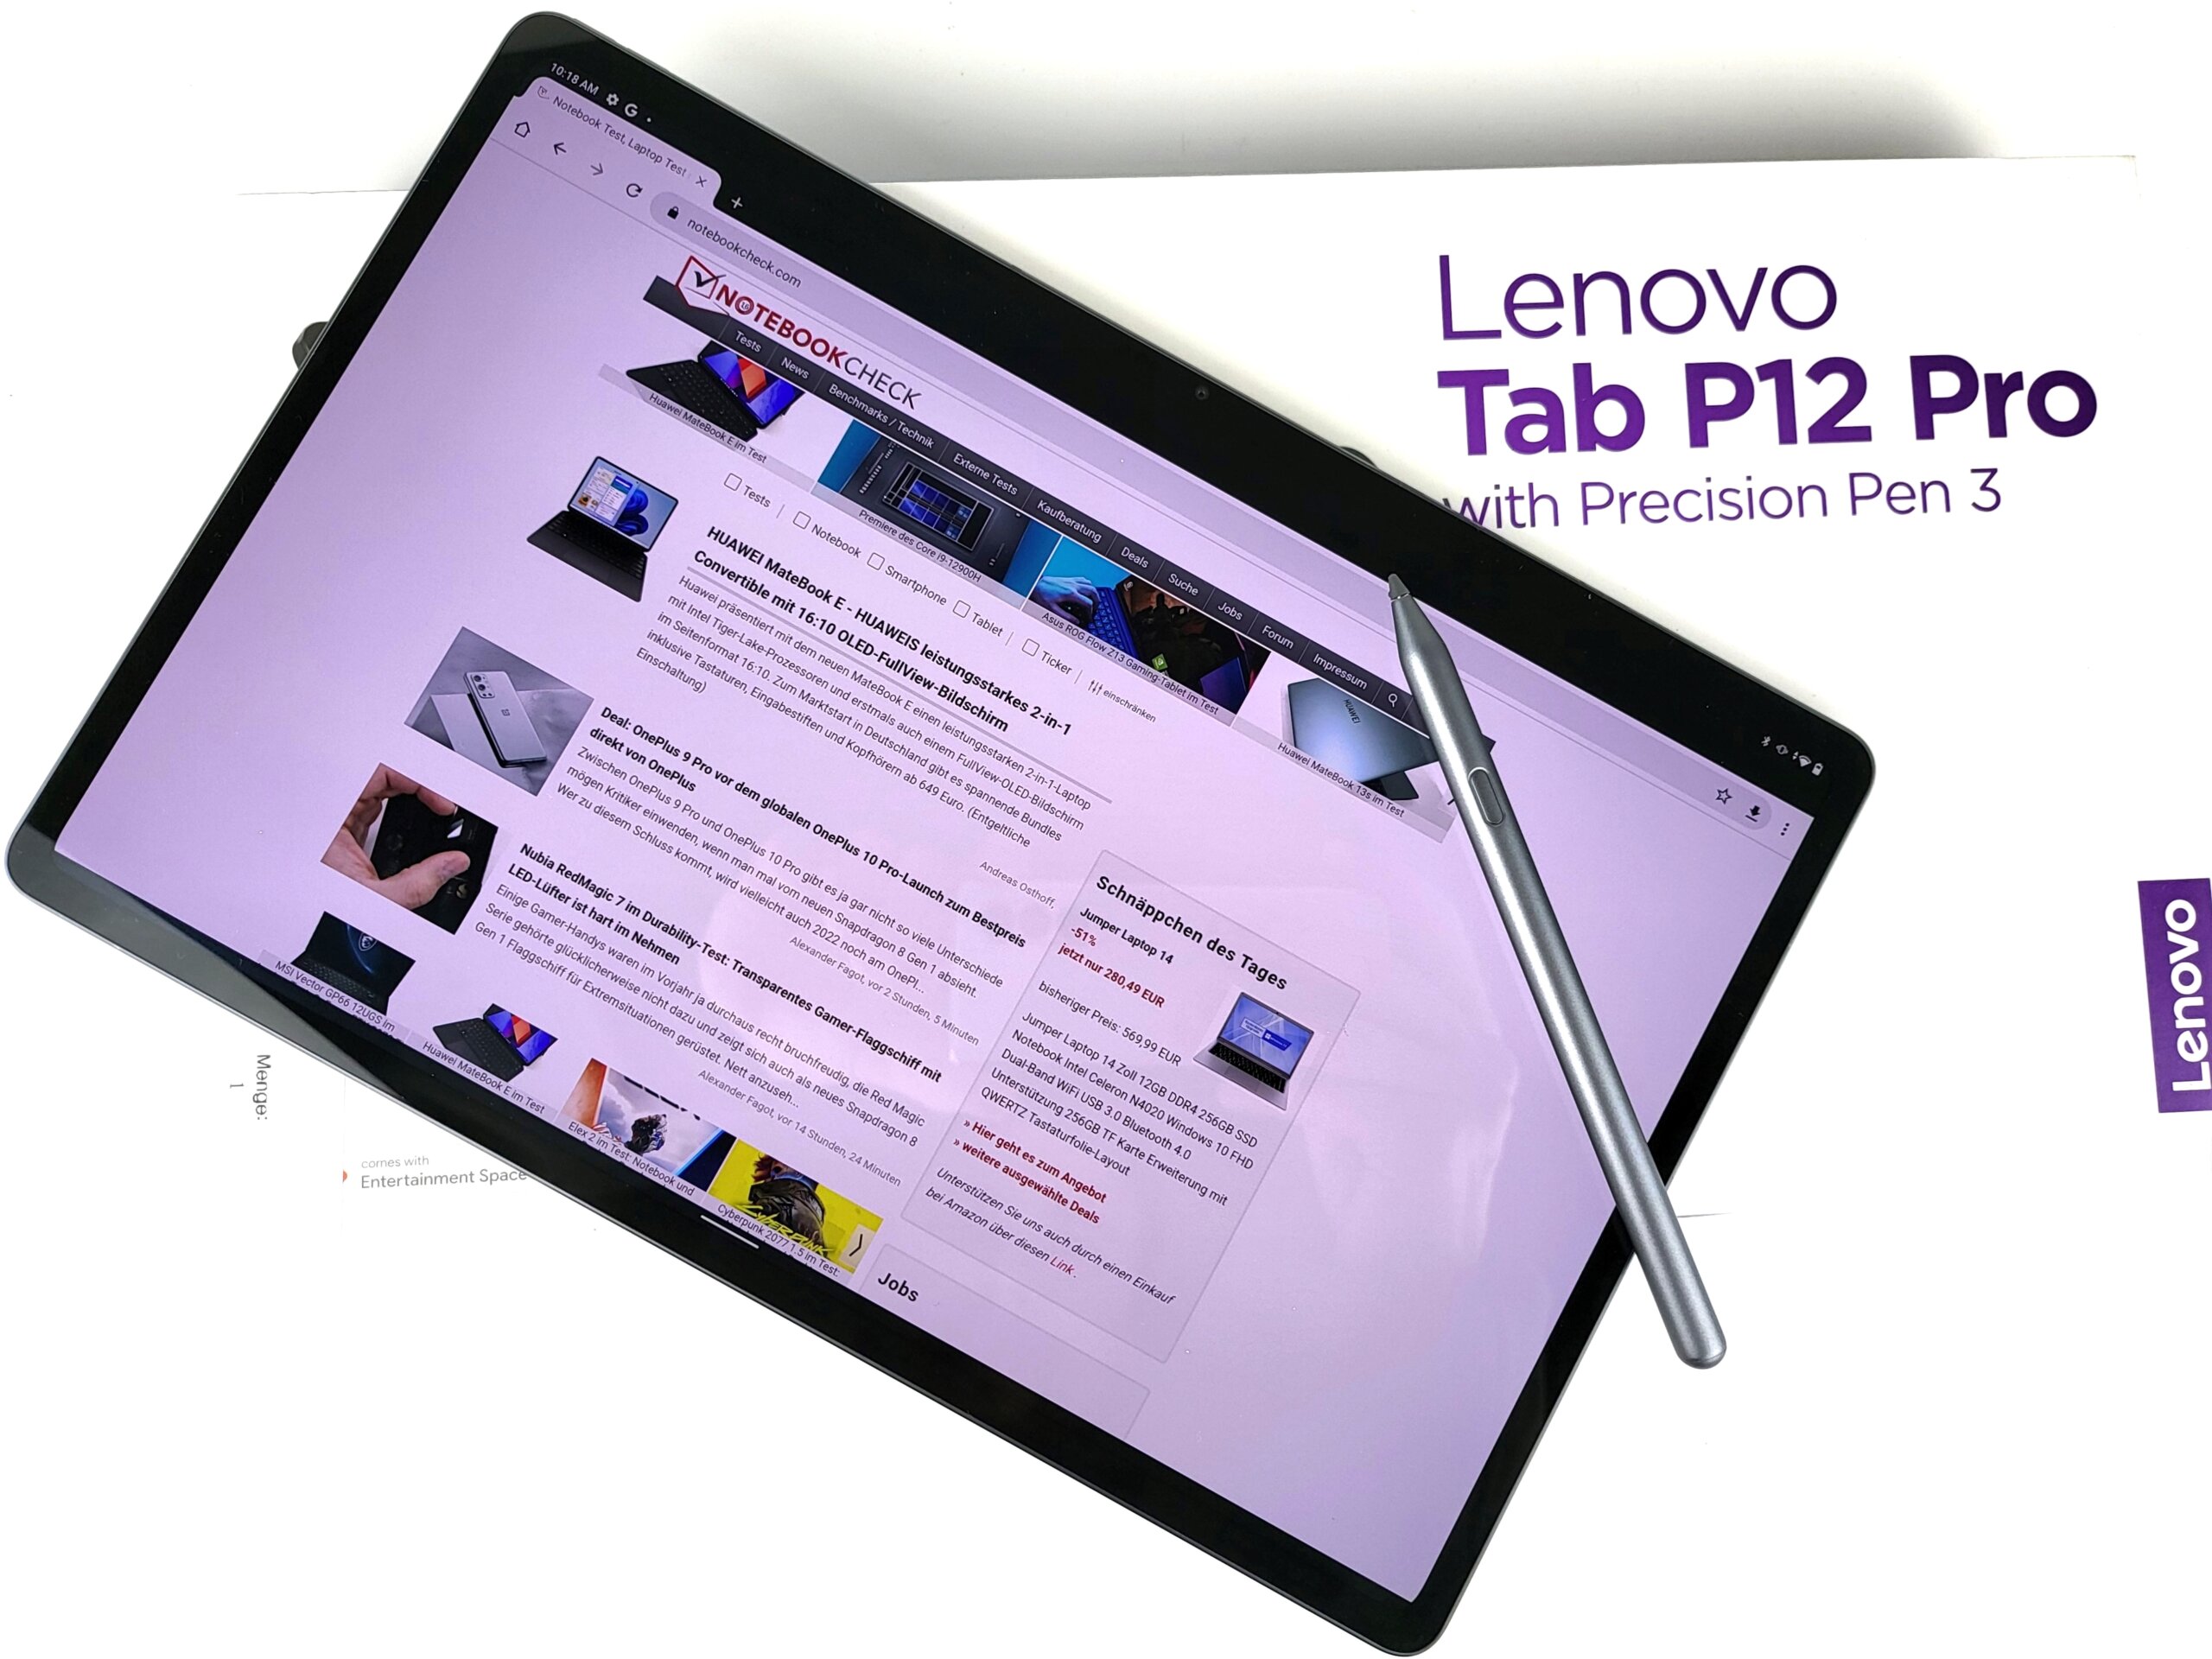 Lenovo Tab P12 Pro Overview Verdict: Top price Tablet with Compelling Business Parts